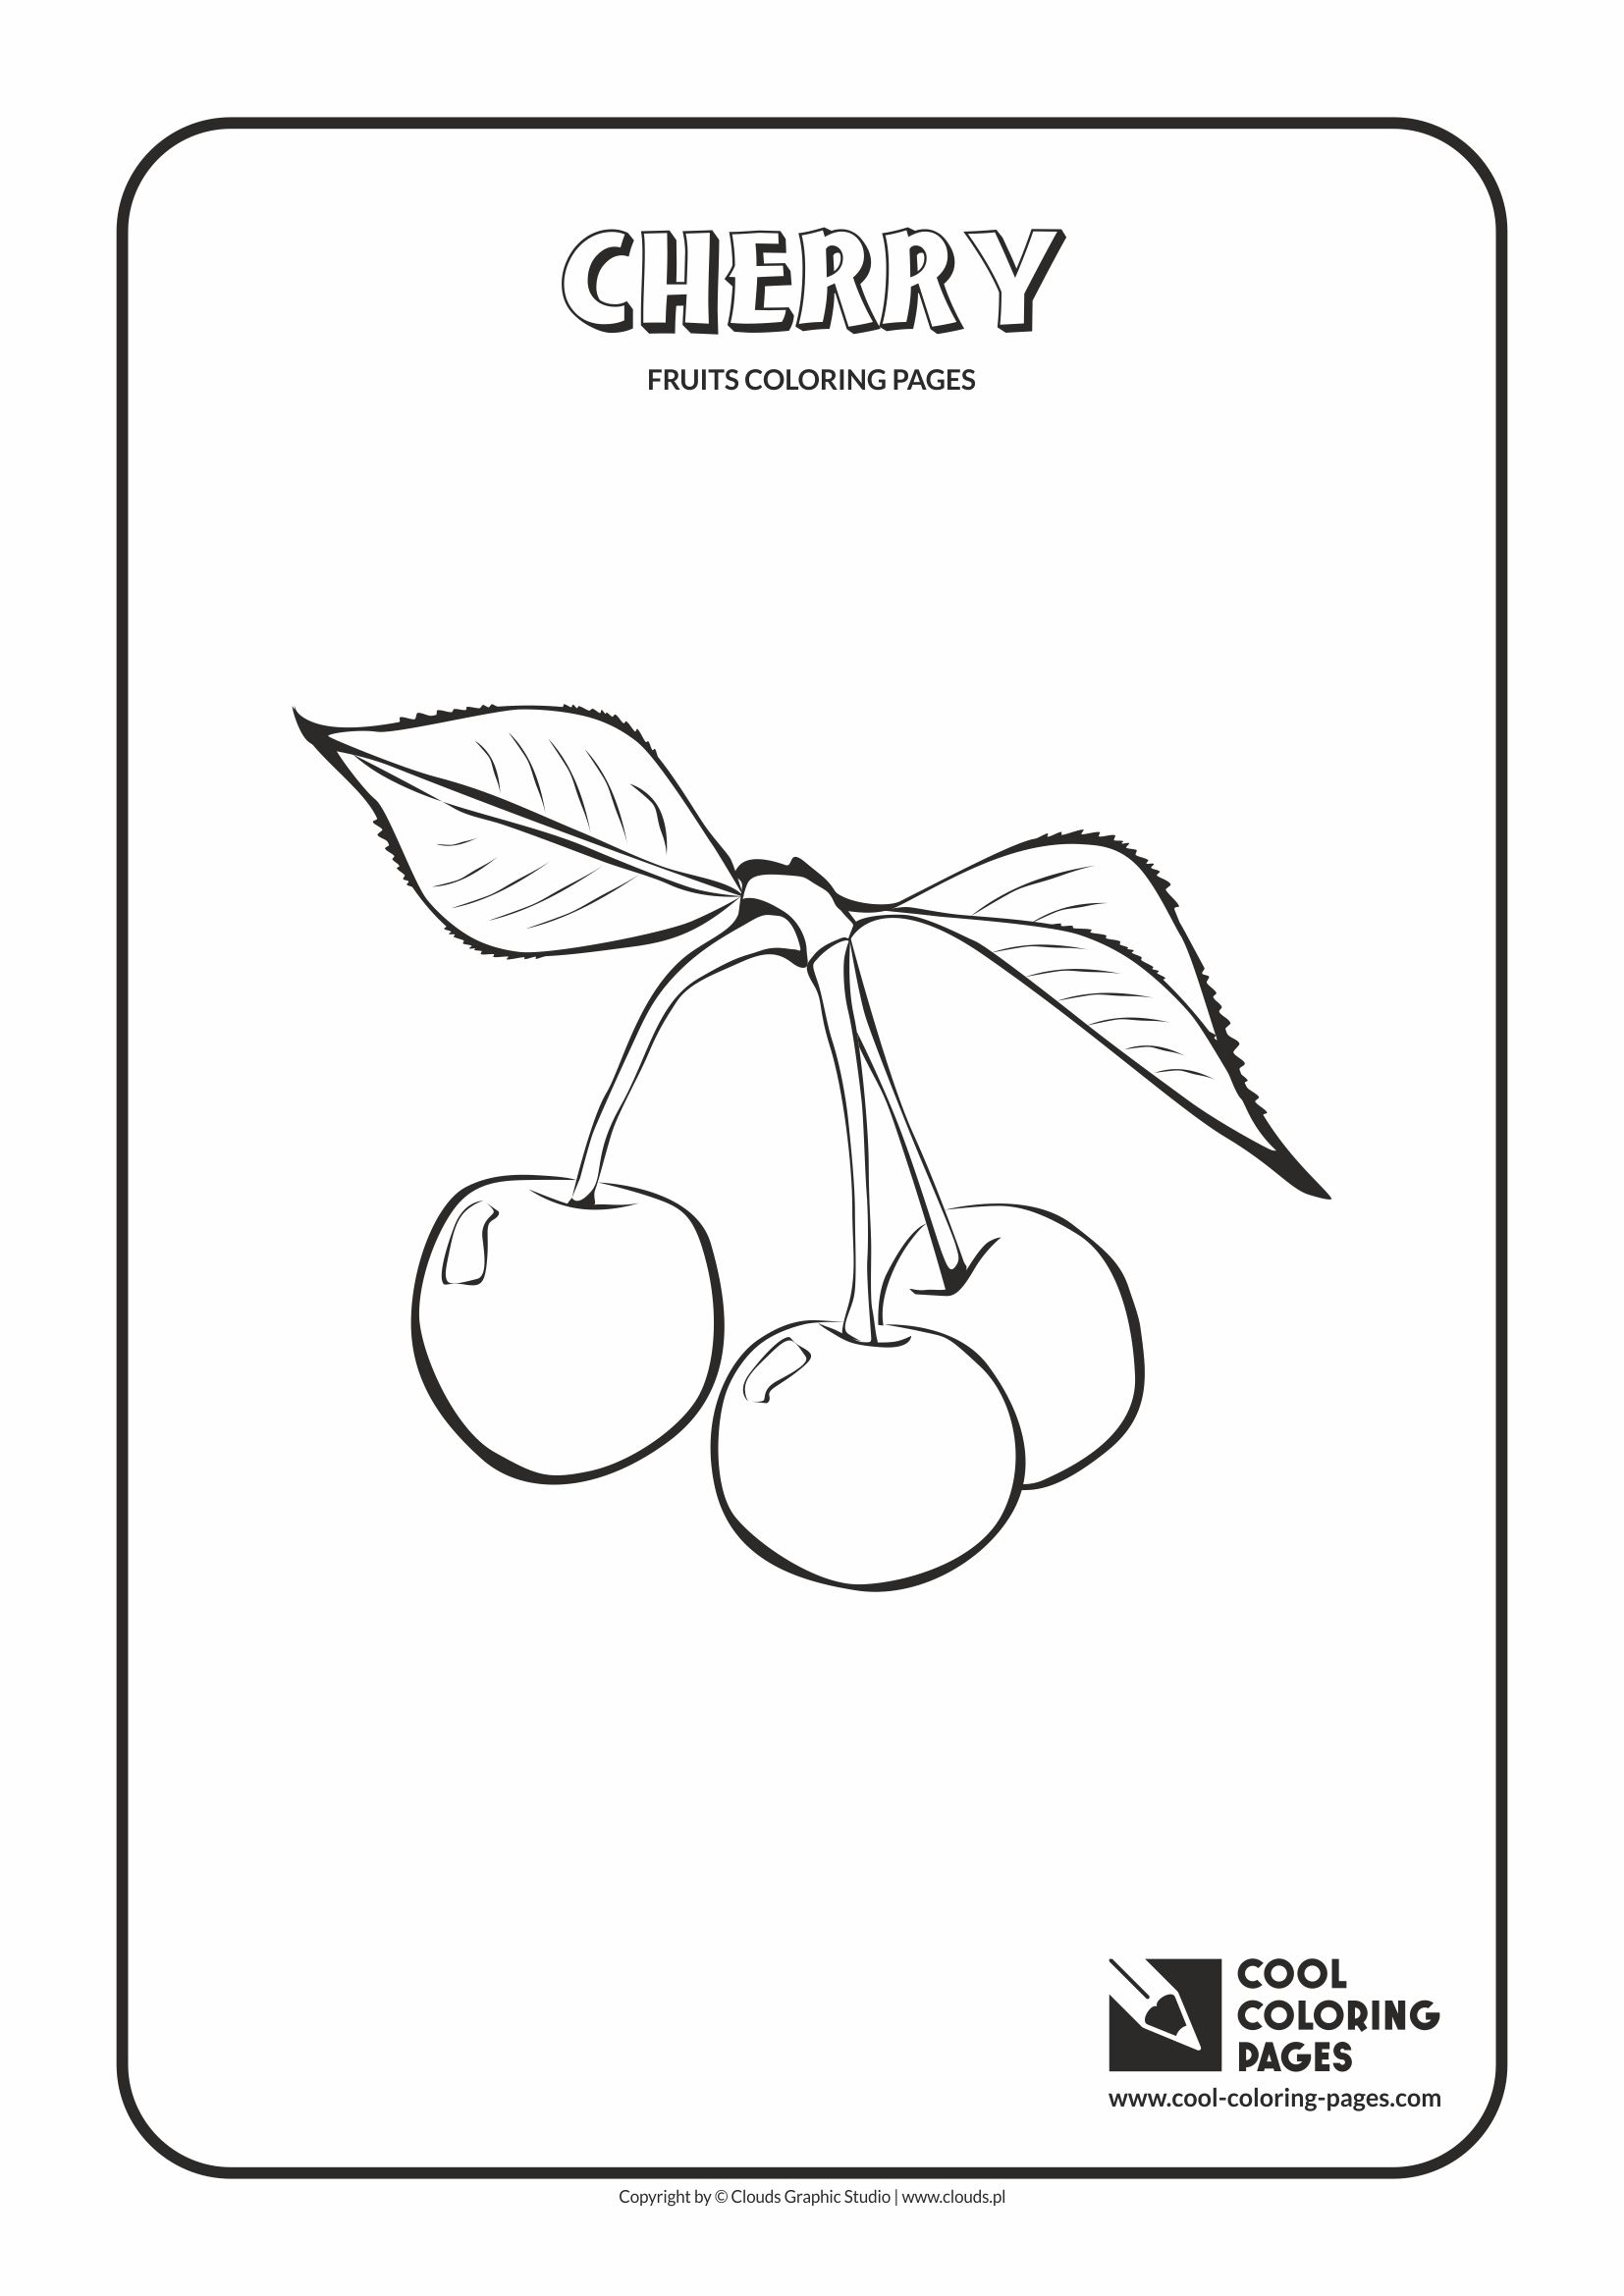 Cool Coloring Pages - Plants / Cherry / Coloring page with cherry